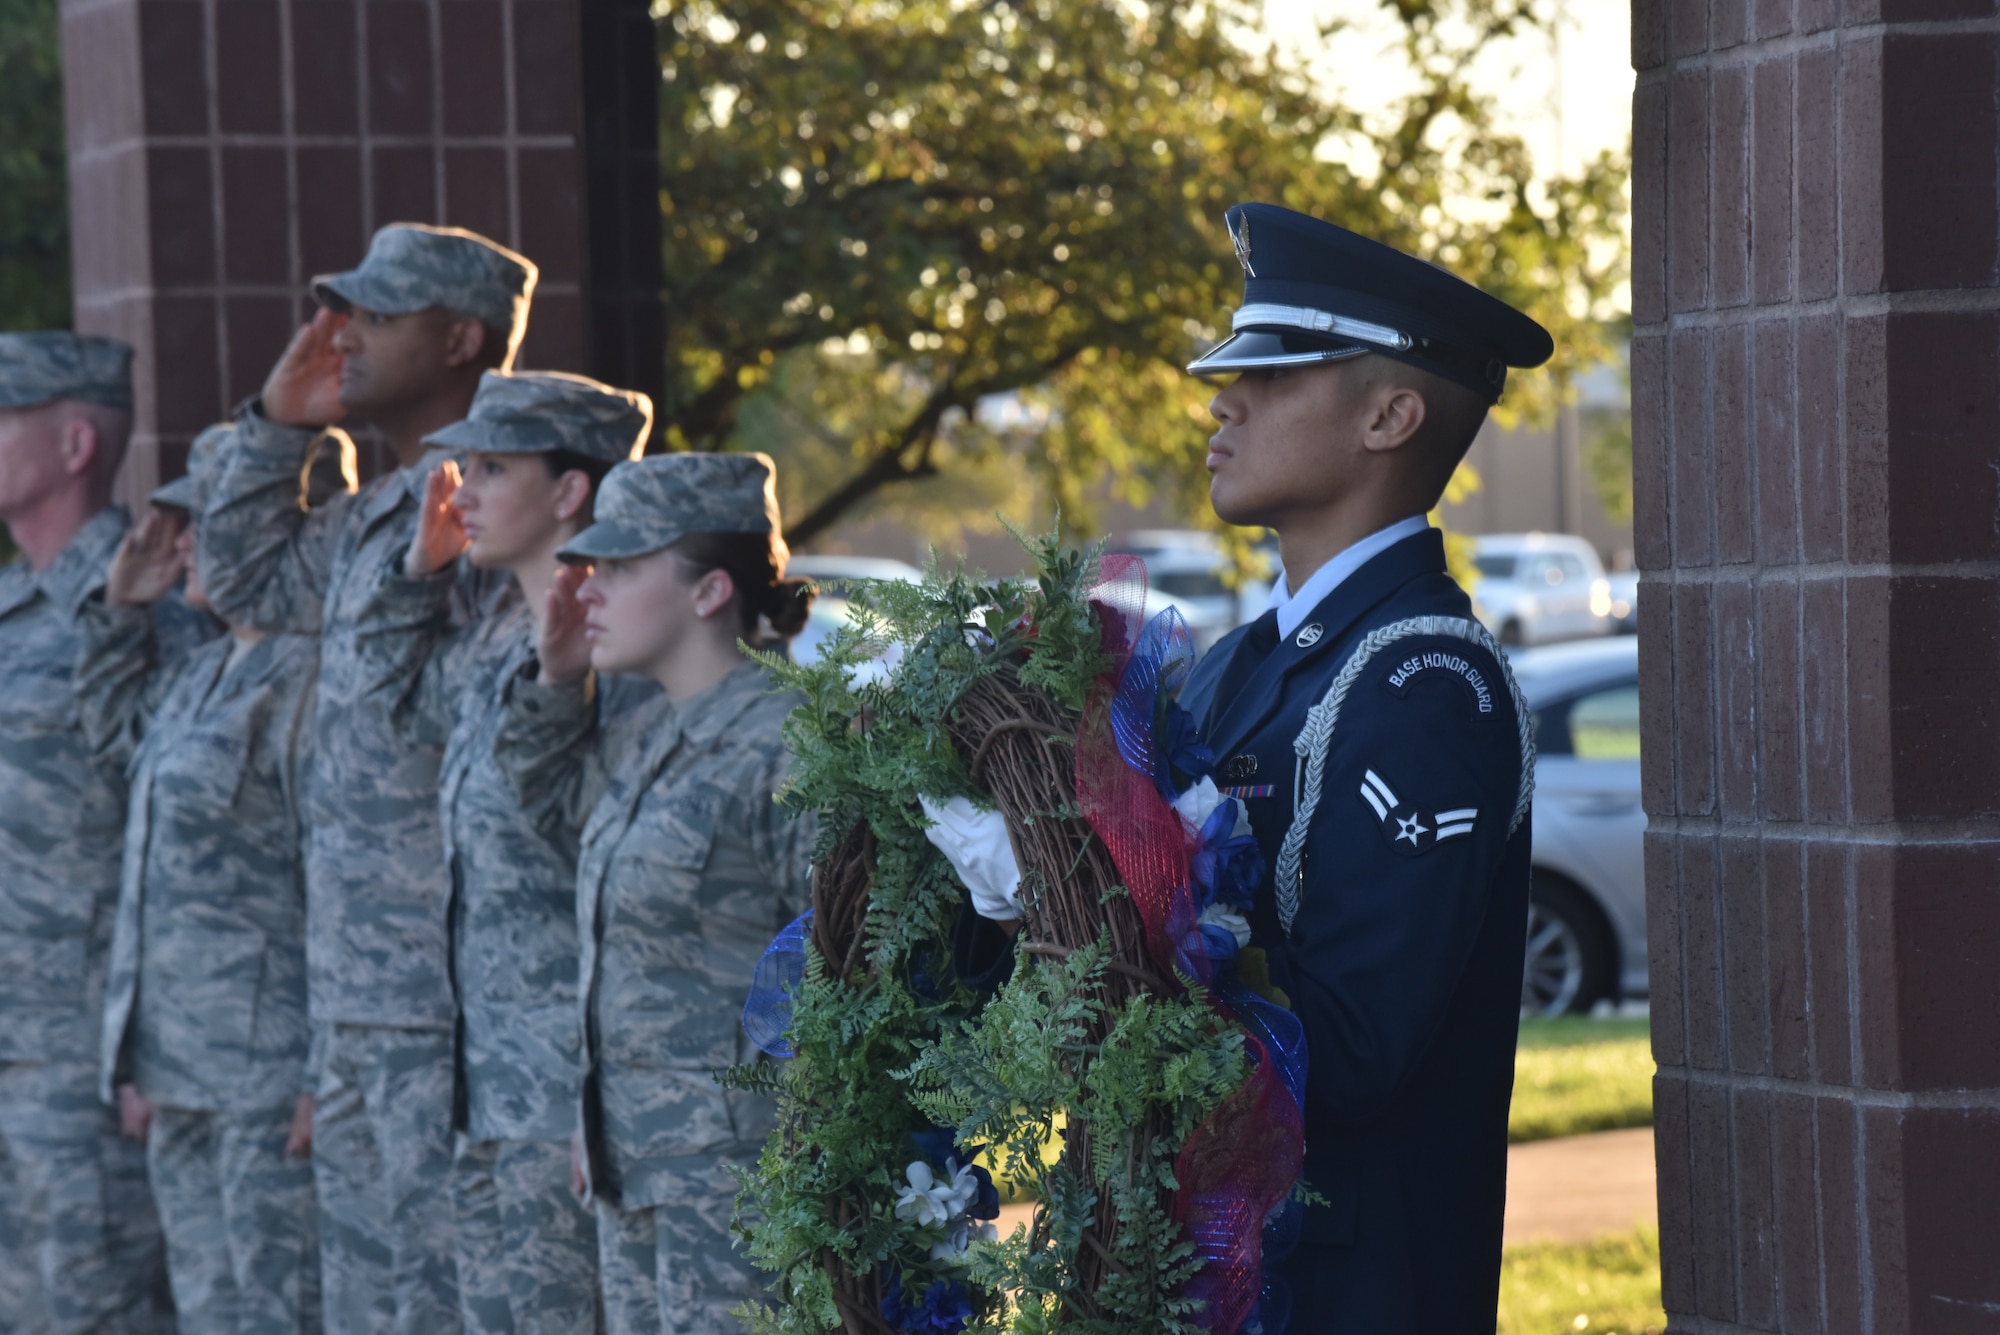 Whiteman Air Force Base Personnel and Base Honor Guard took place in a wreath laying ceremony to commemorate those lost during the September 11th attacks.